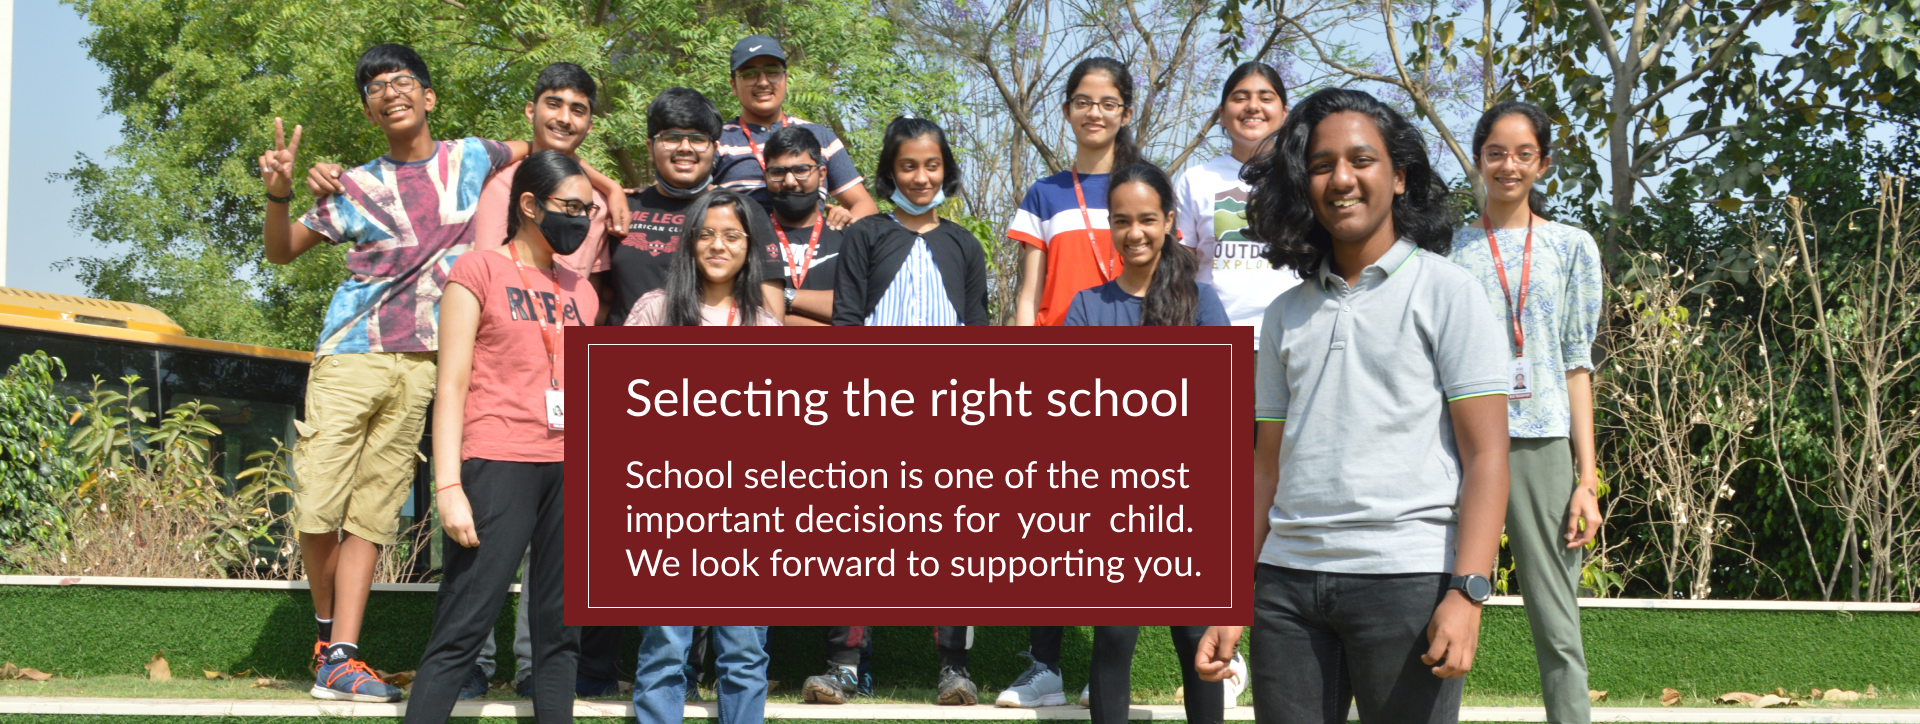 Selecting the right school